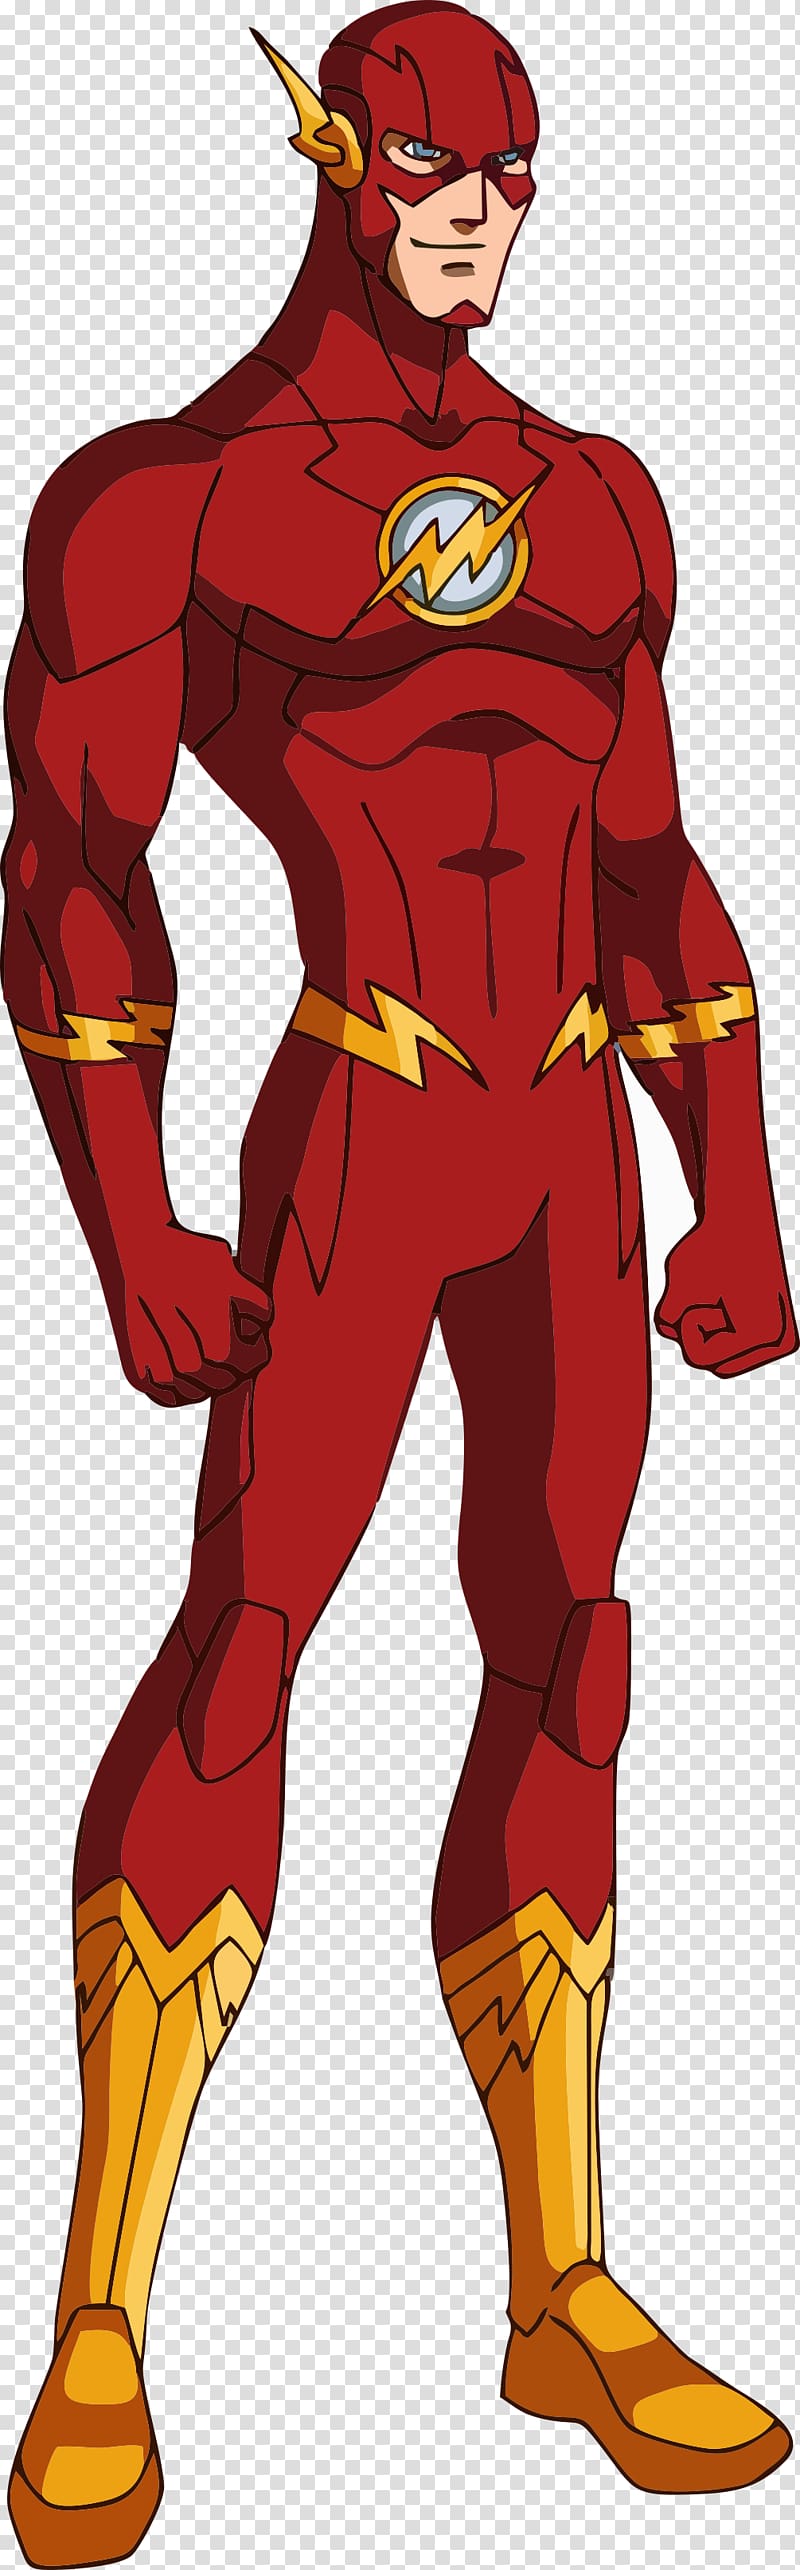 Animated The Flash, The Flash Batman Superman Wally West, Flash Pic transparent background PNG clipart